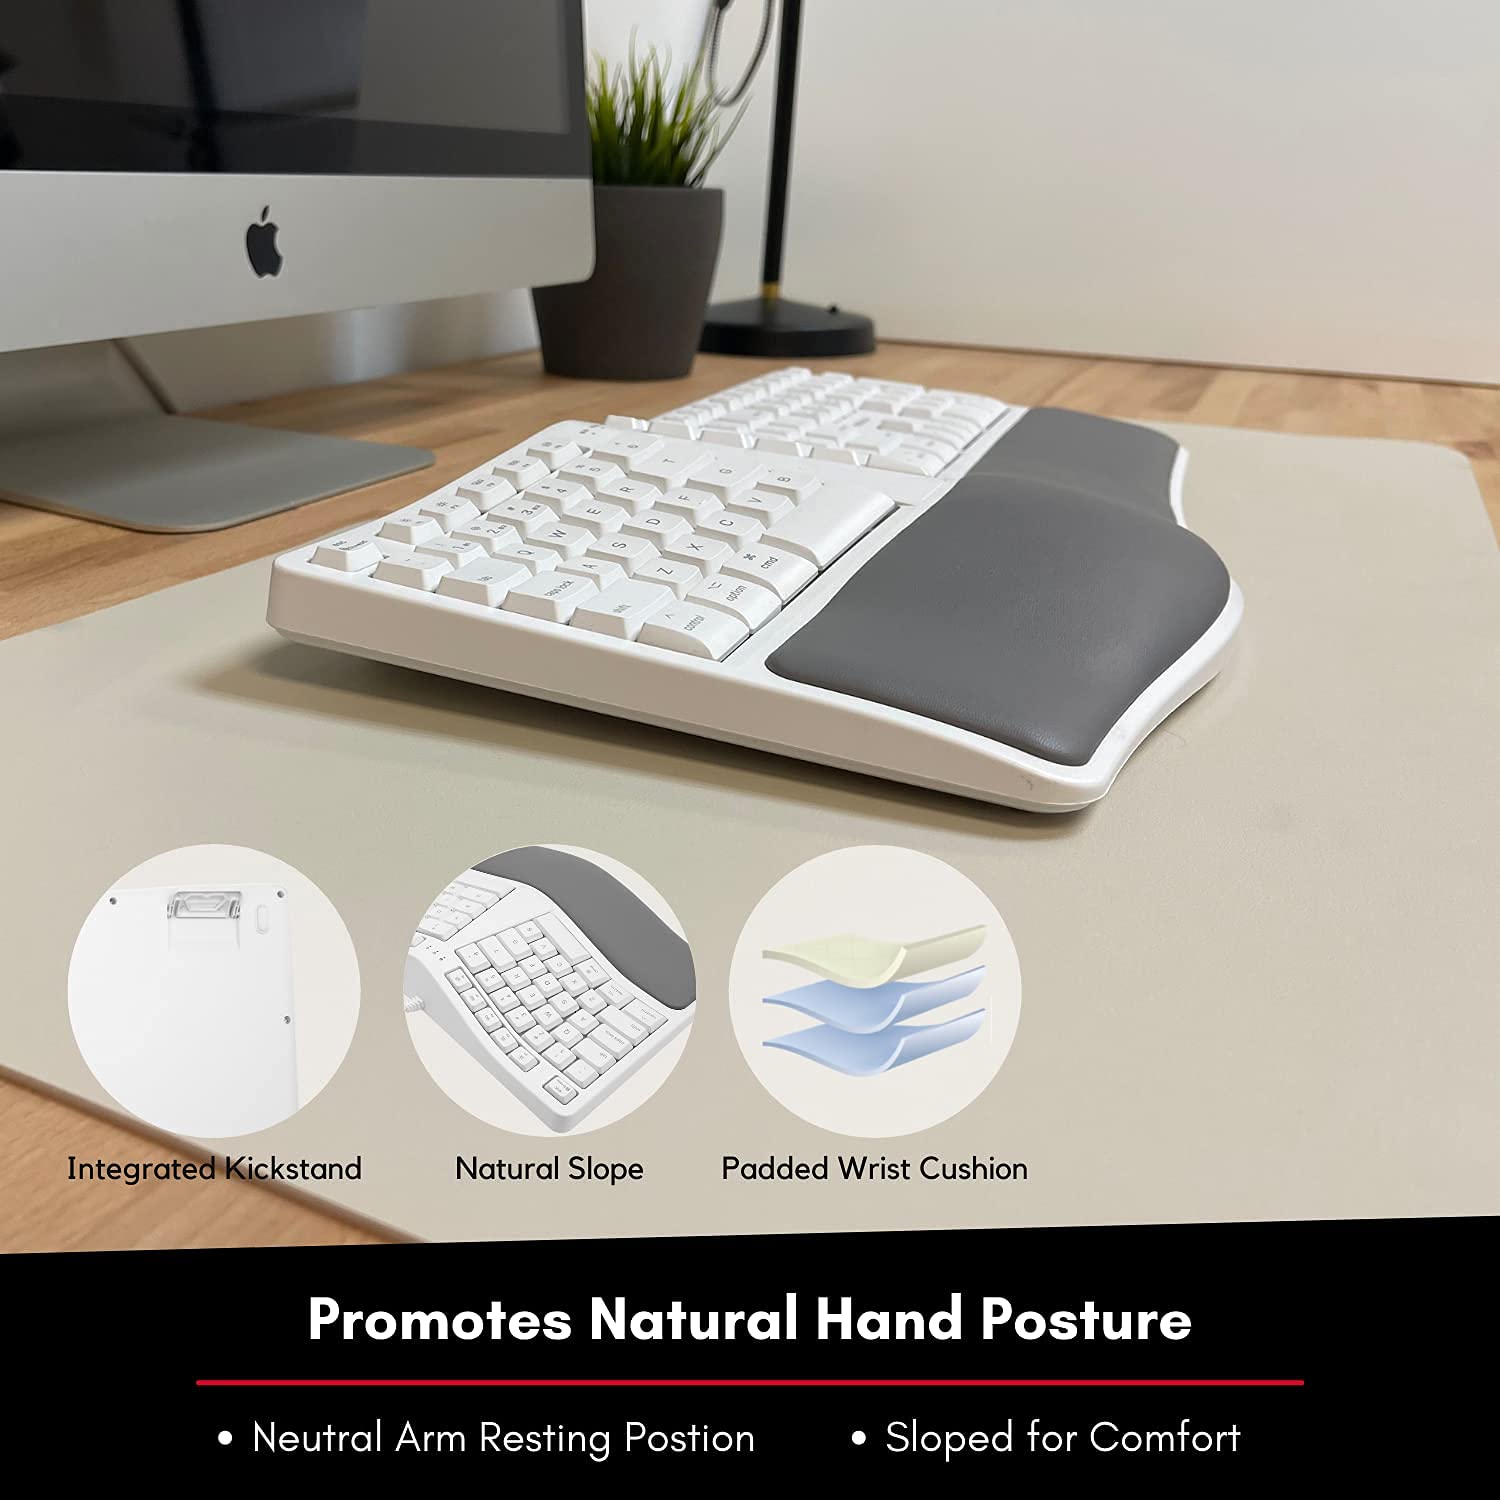 Macally Wireless Ergonomic Keyboard and a Quiet Click Mouse, Work Like You're Supposed to.